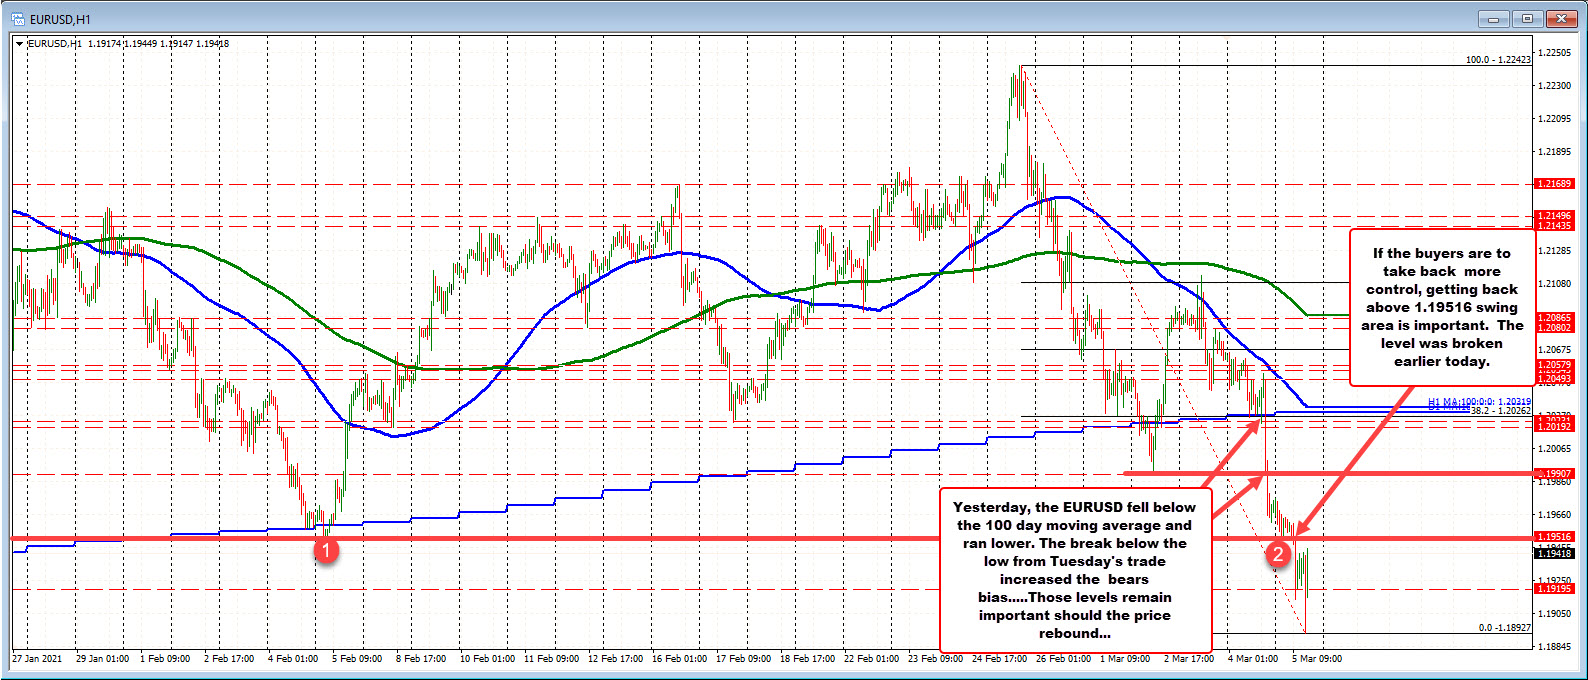 The 1.19516 level is eyed as a key target if the buyers are to take more control.